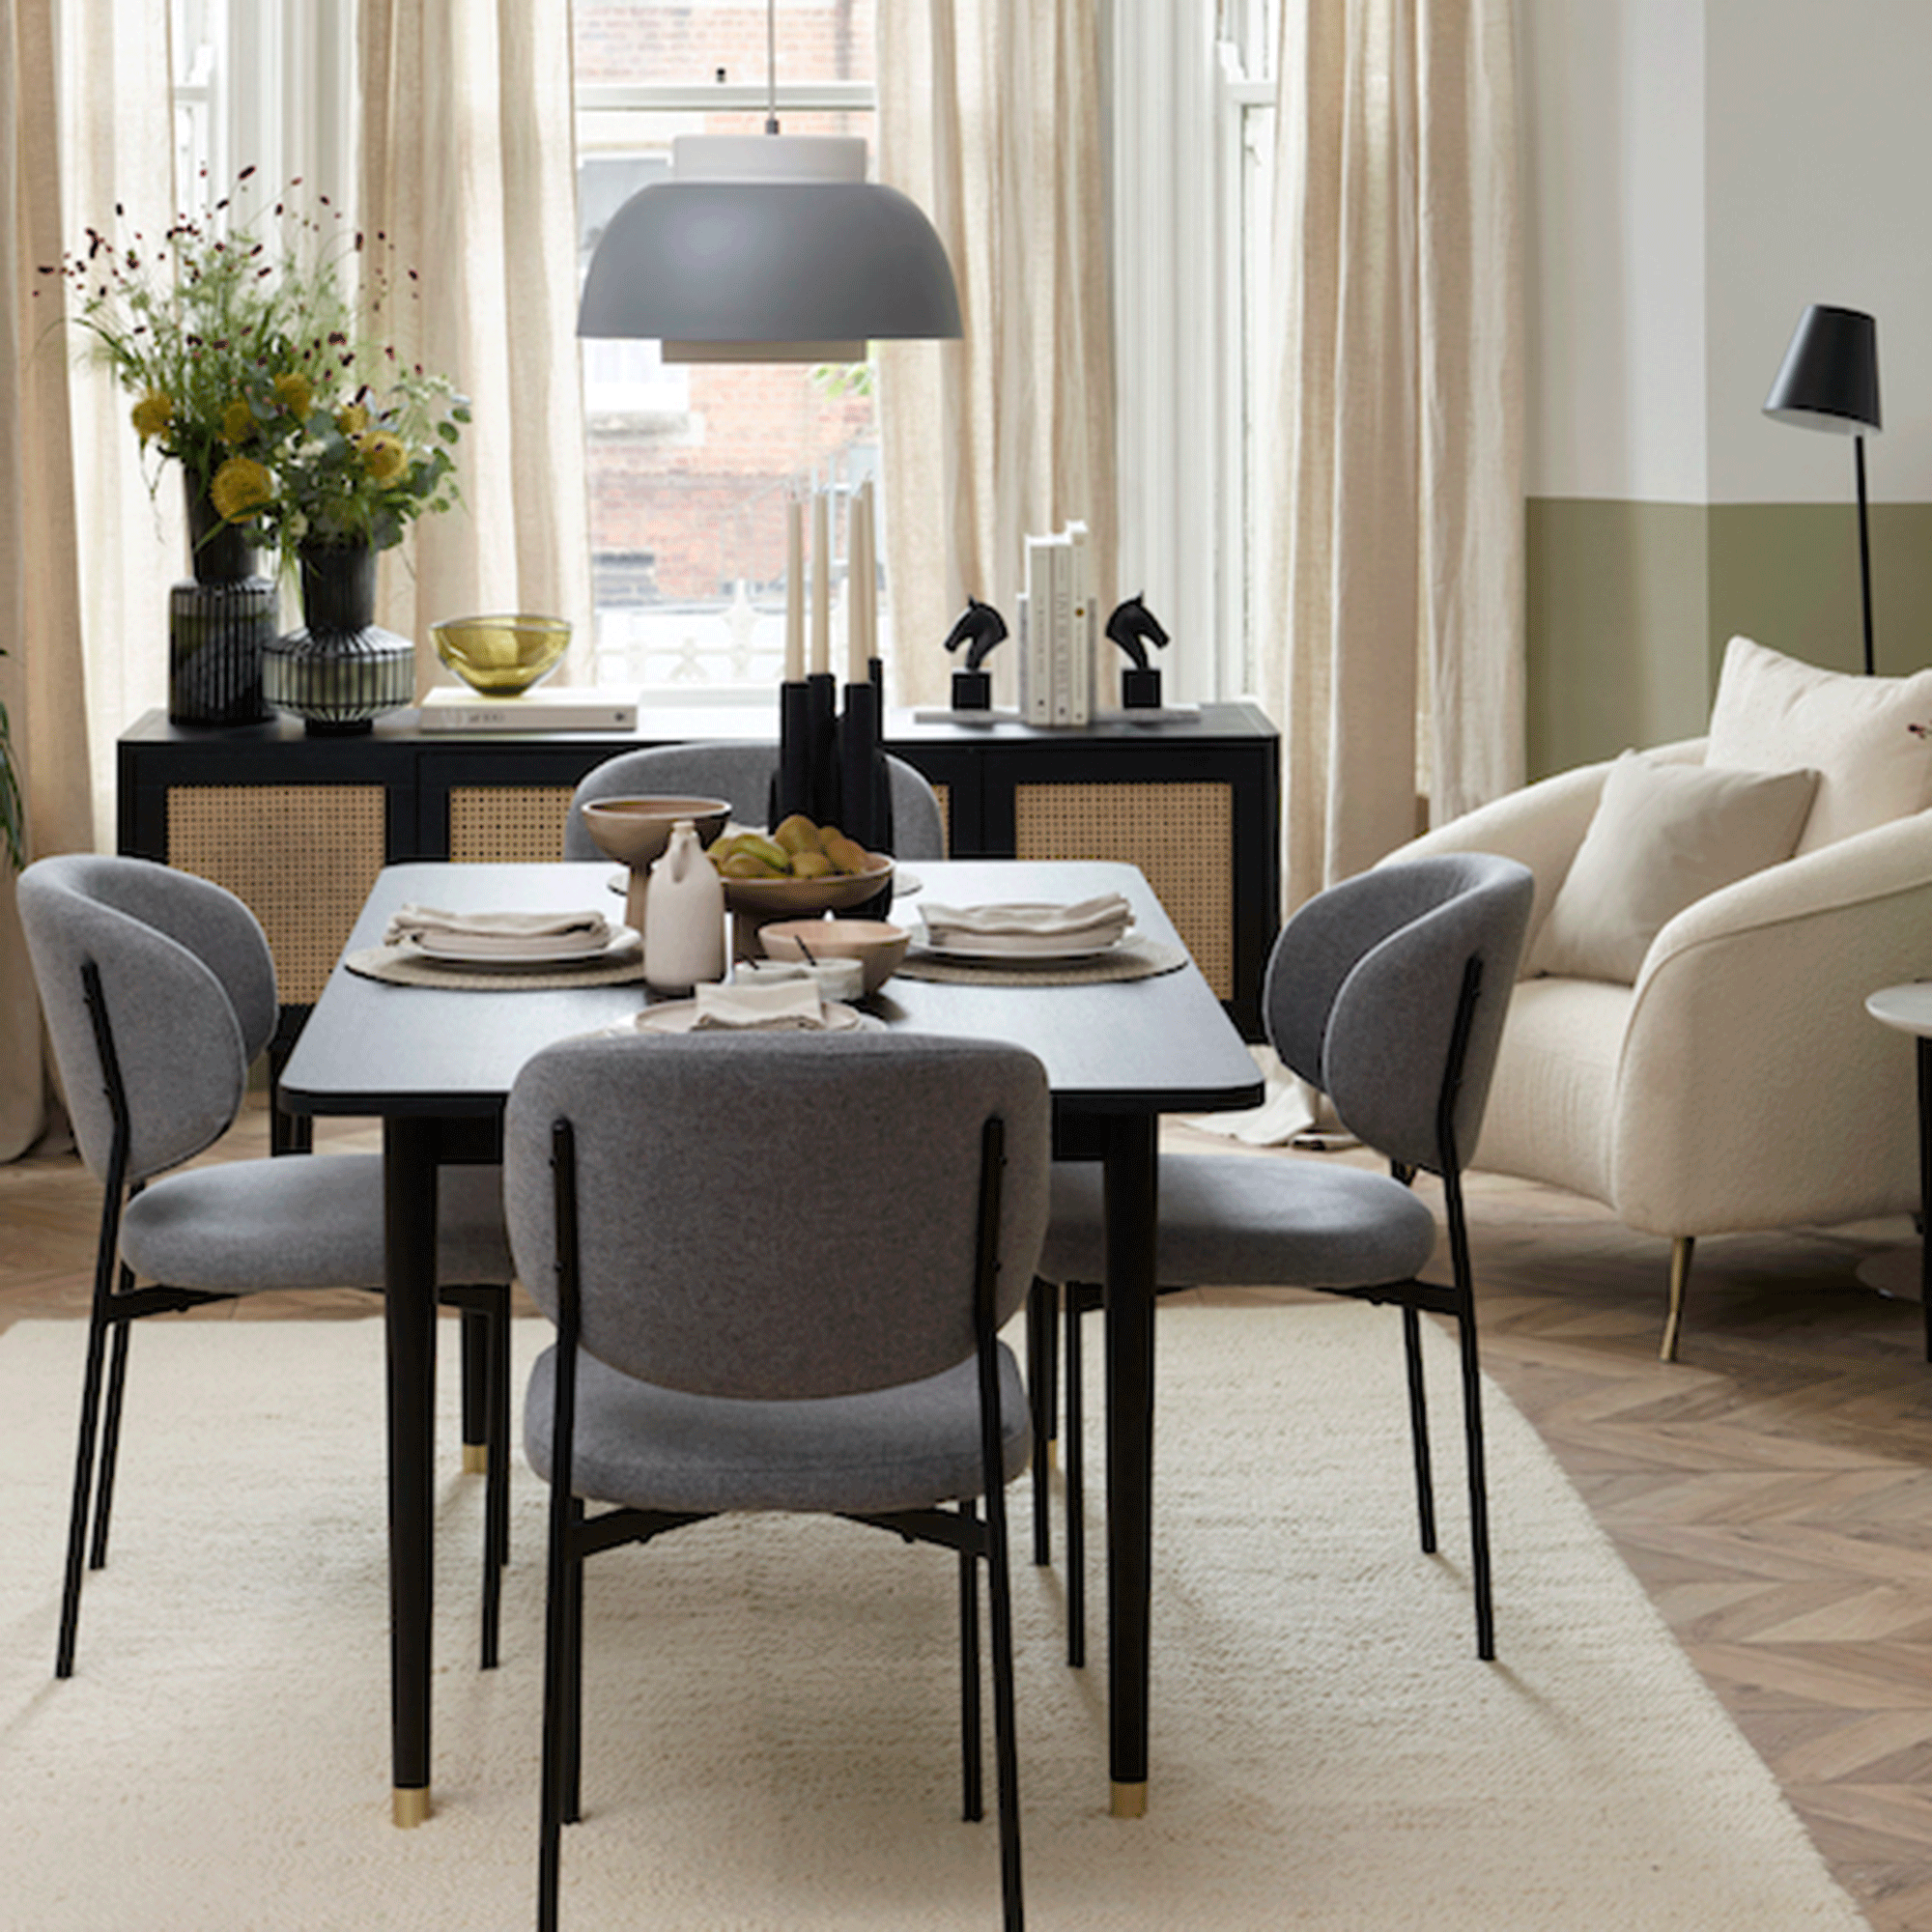 Small dining room with white armchair